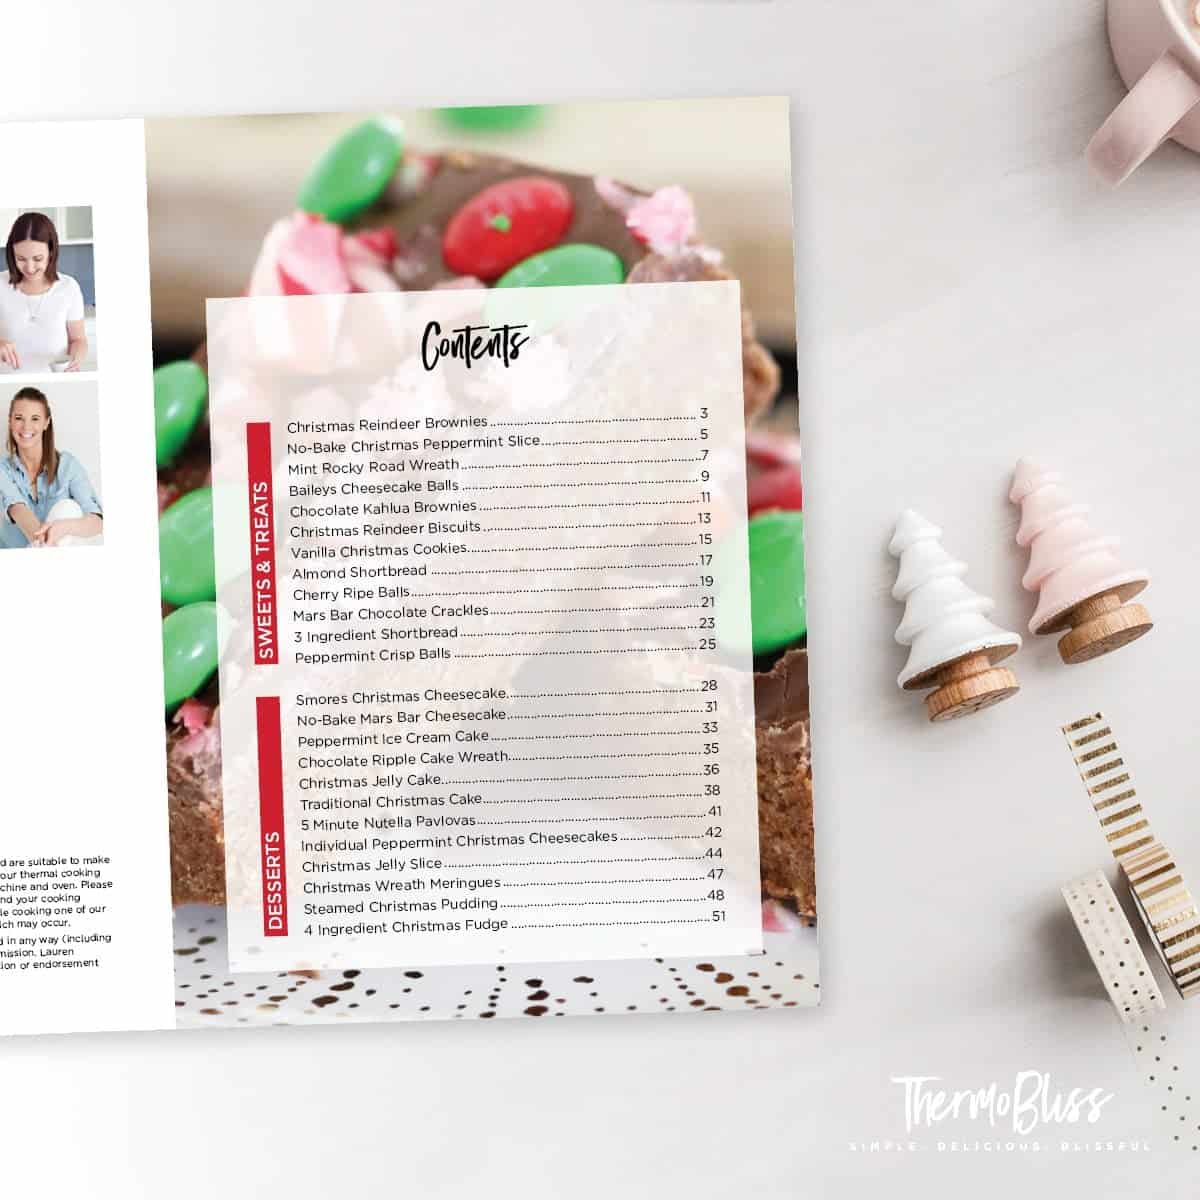 Image of Thermomix Christmas Cookbook contents page.